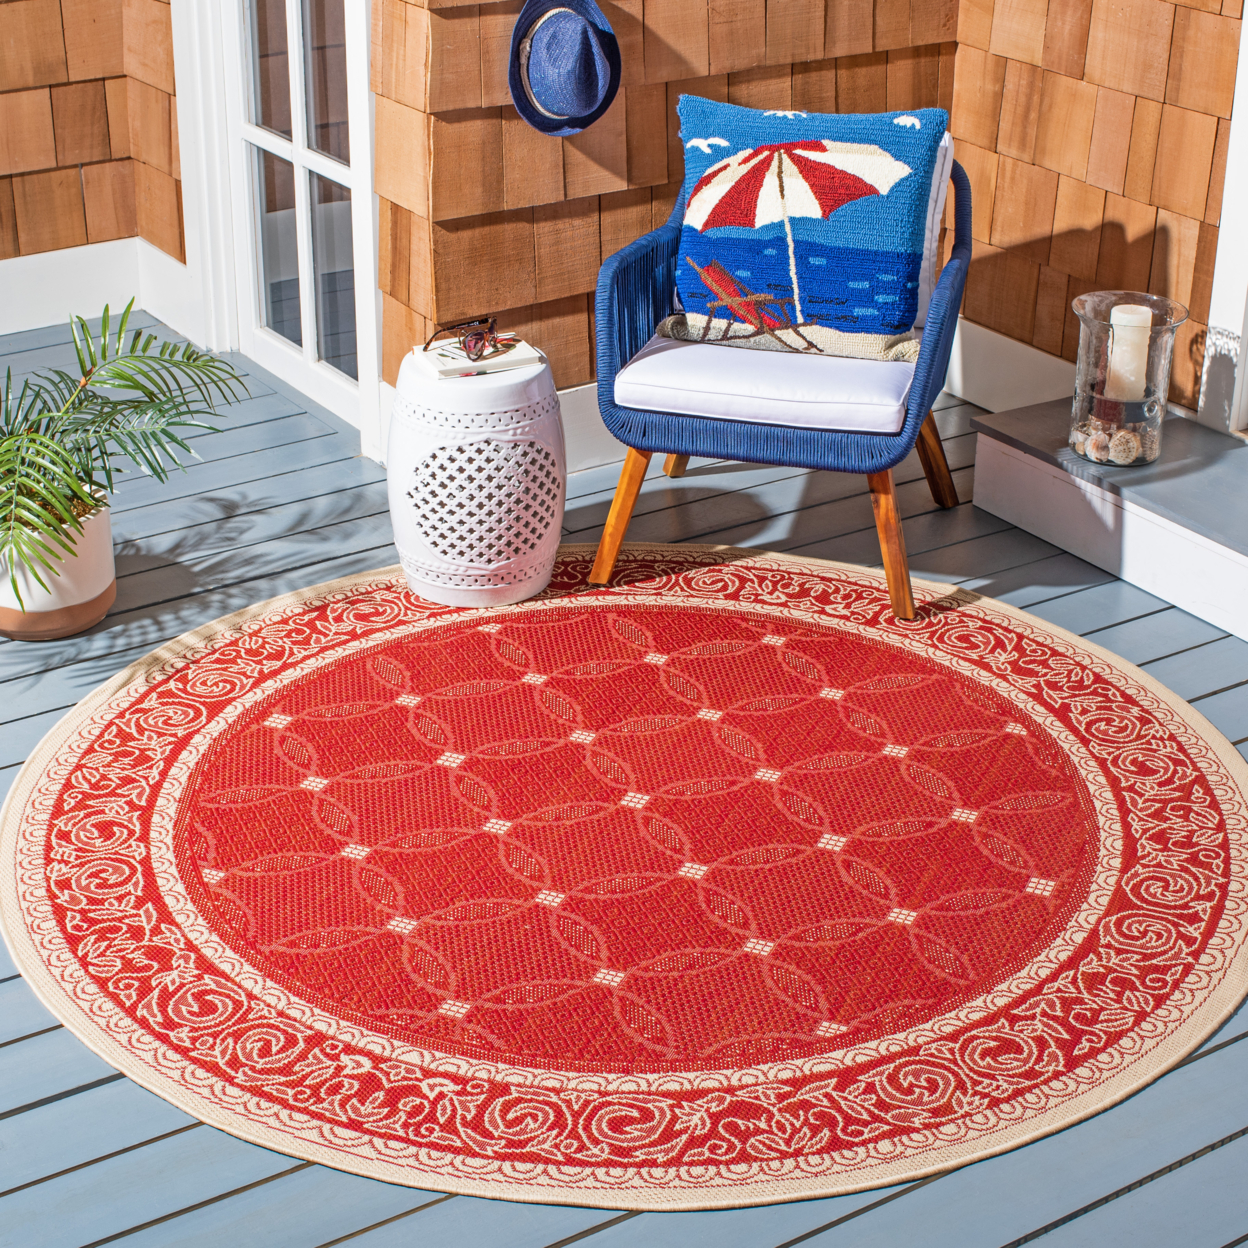 SAFAVIEH Outdoor CY1502-3707 Courtyard Red / Natural Rug - 8' X 11'